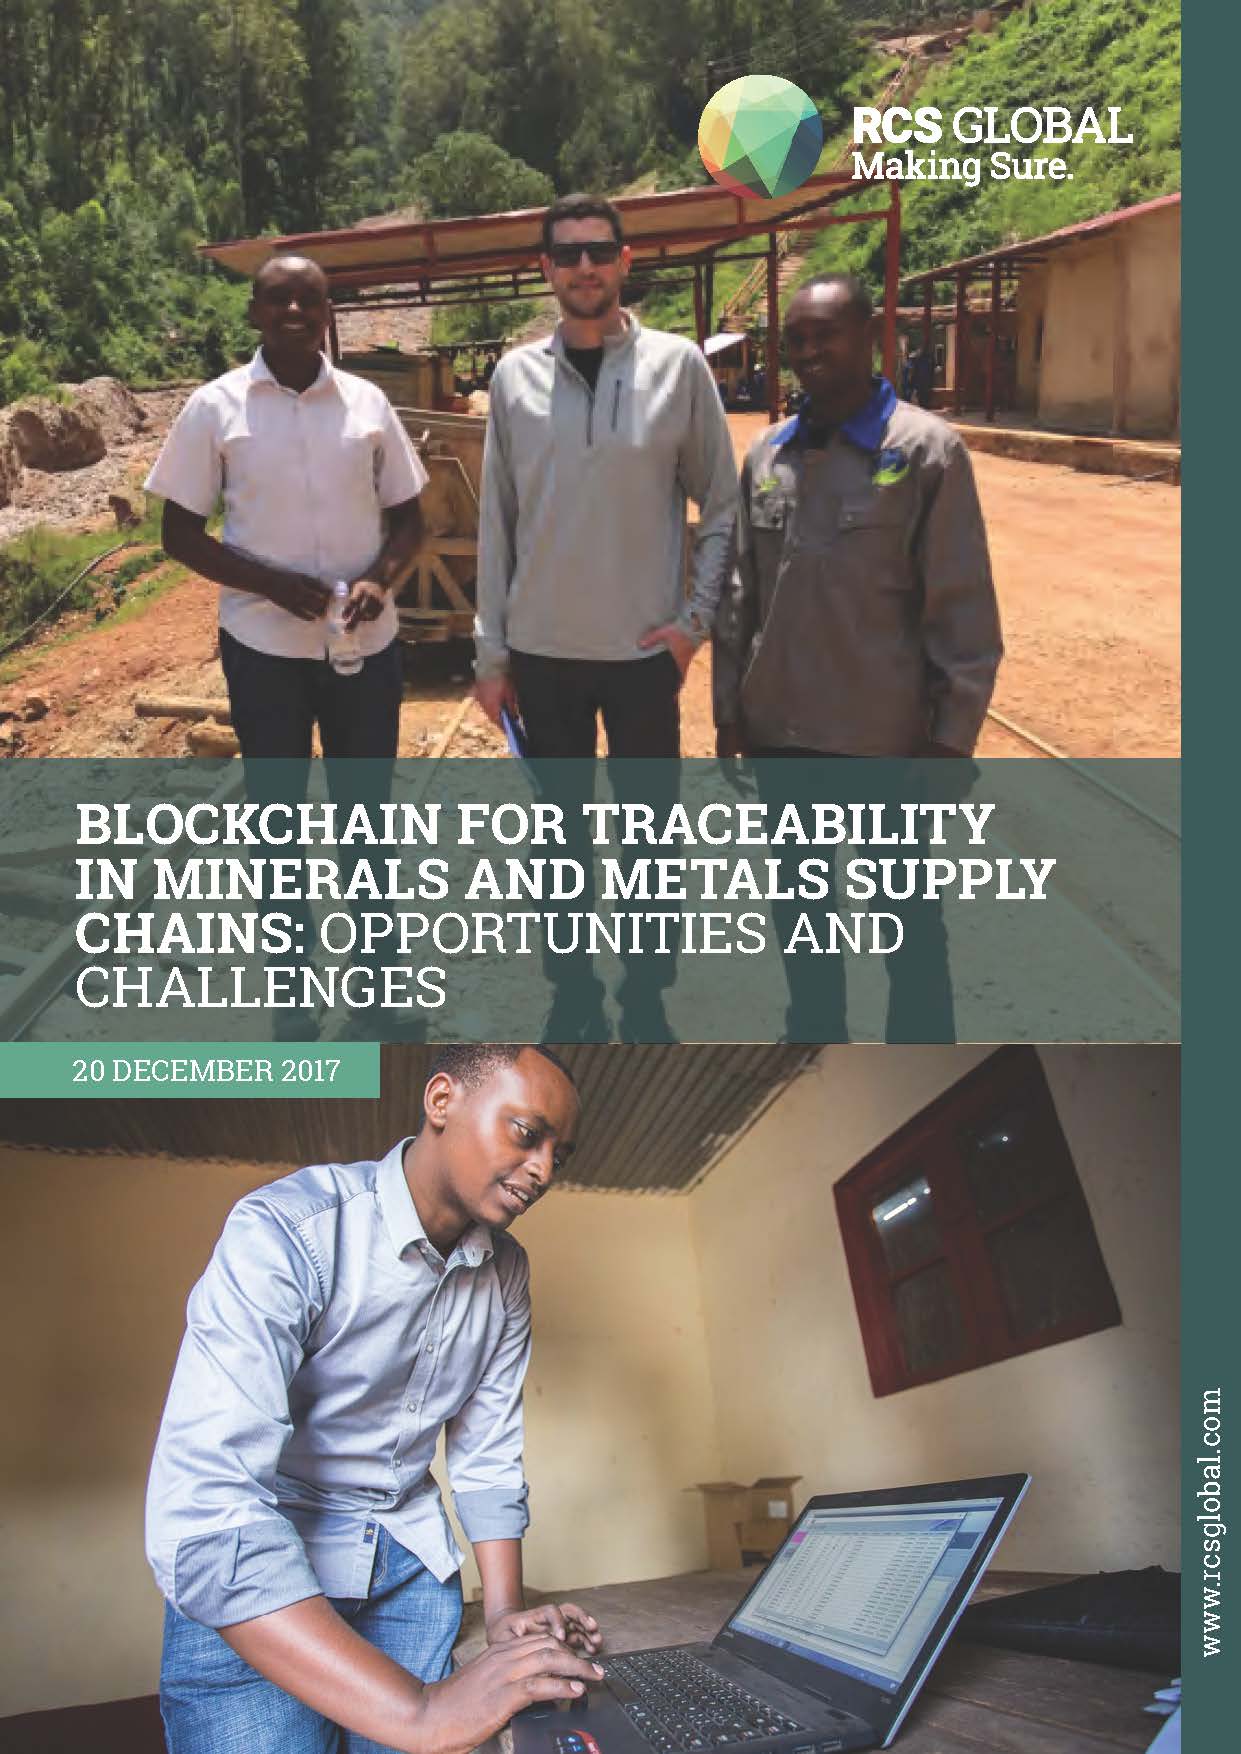 ICMM Blockchain for Traceability in Minerals and Metal Supply Chains